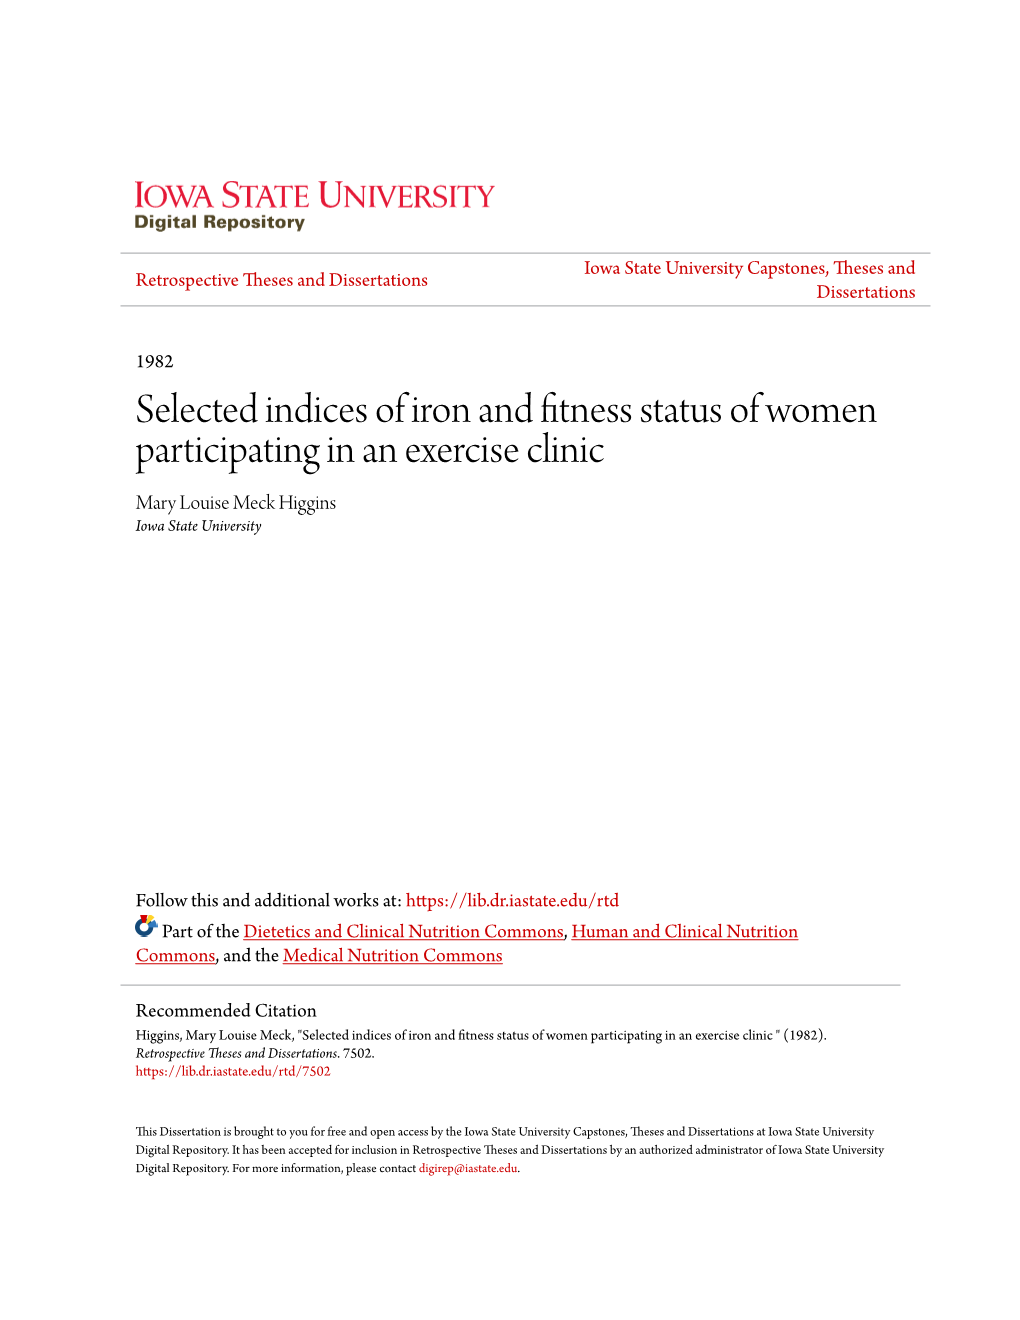 Selected Indices of Iron and Fitness Status of Women Participating in an Exercise Clinic Mary Louise Meck Higgins Iowa State University